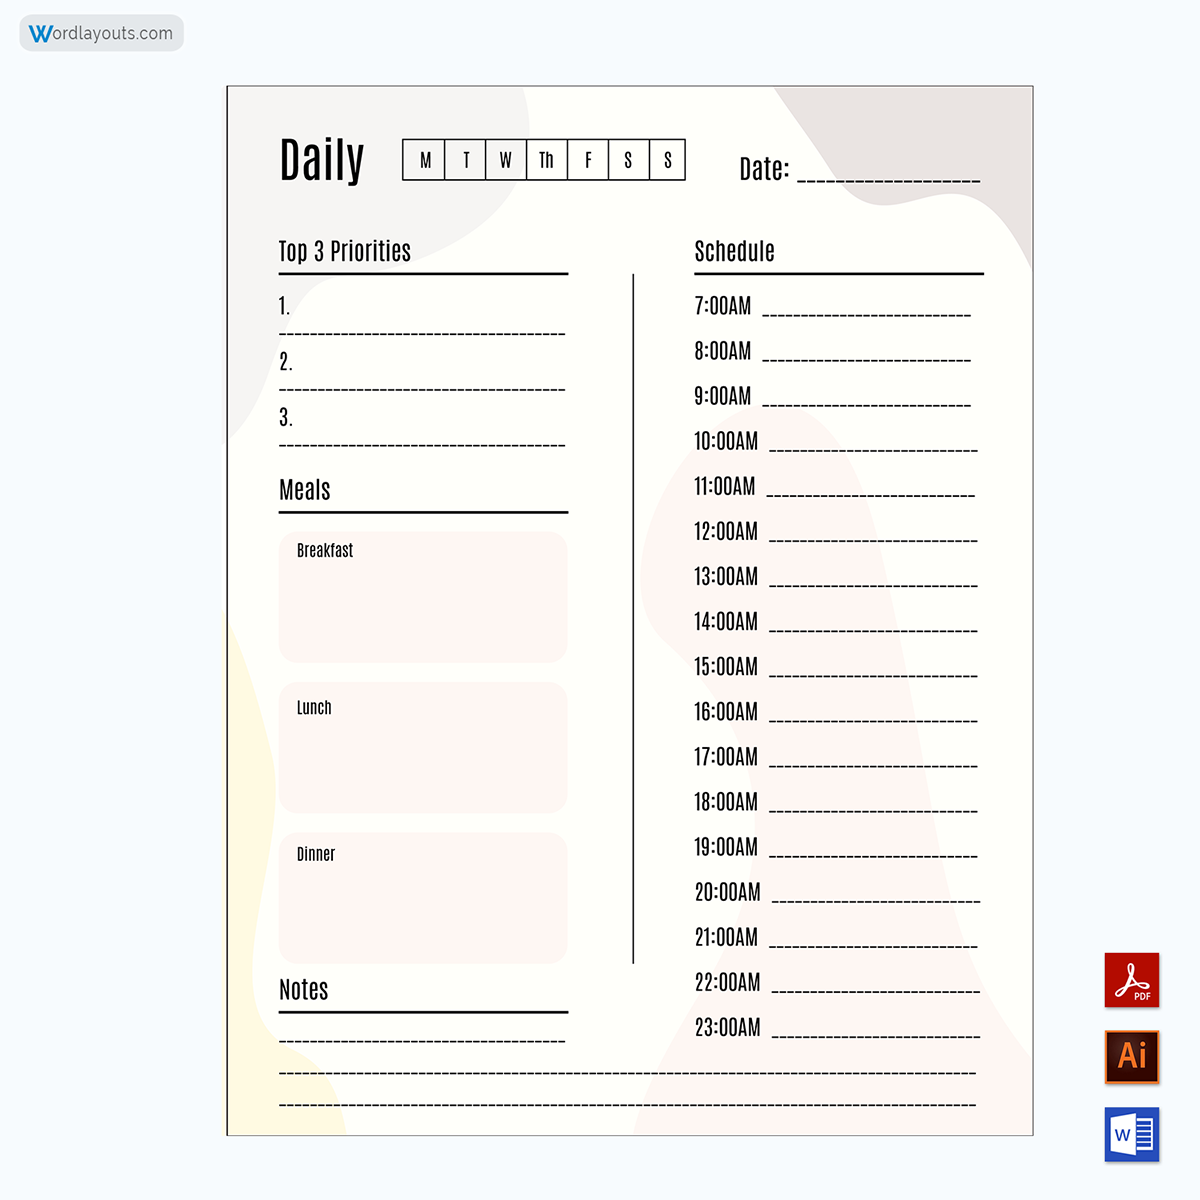 Daily-Planner-Template-8669ndnjp-06-23-p08